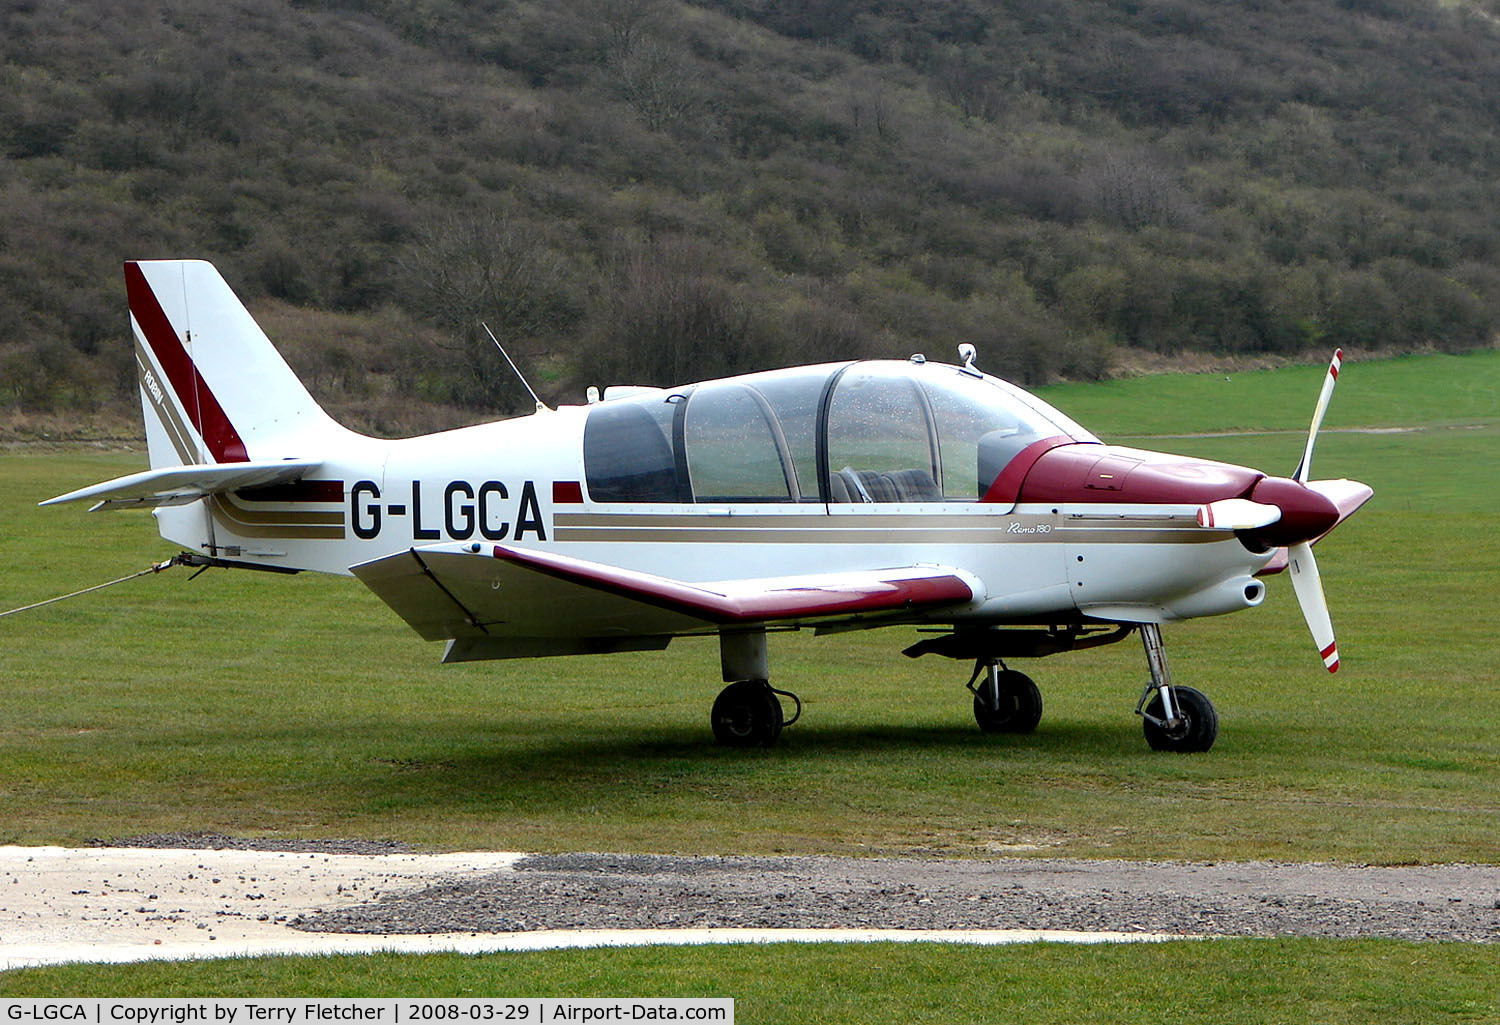 G-LGCA, 1985 Robin DR-400-180R Remorqueur Regent C/N 1686, Tug for the Gliders at Dunstable Downs